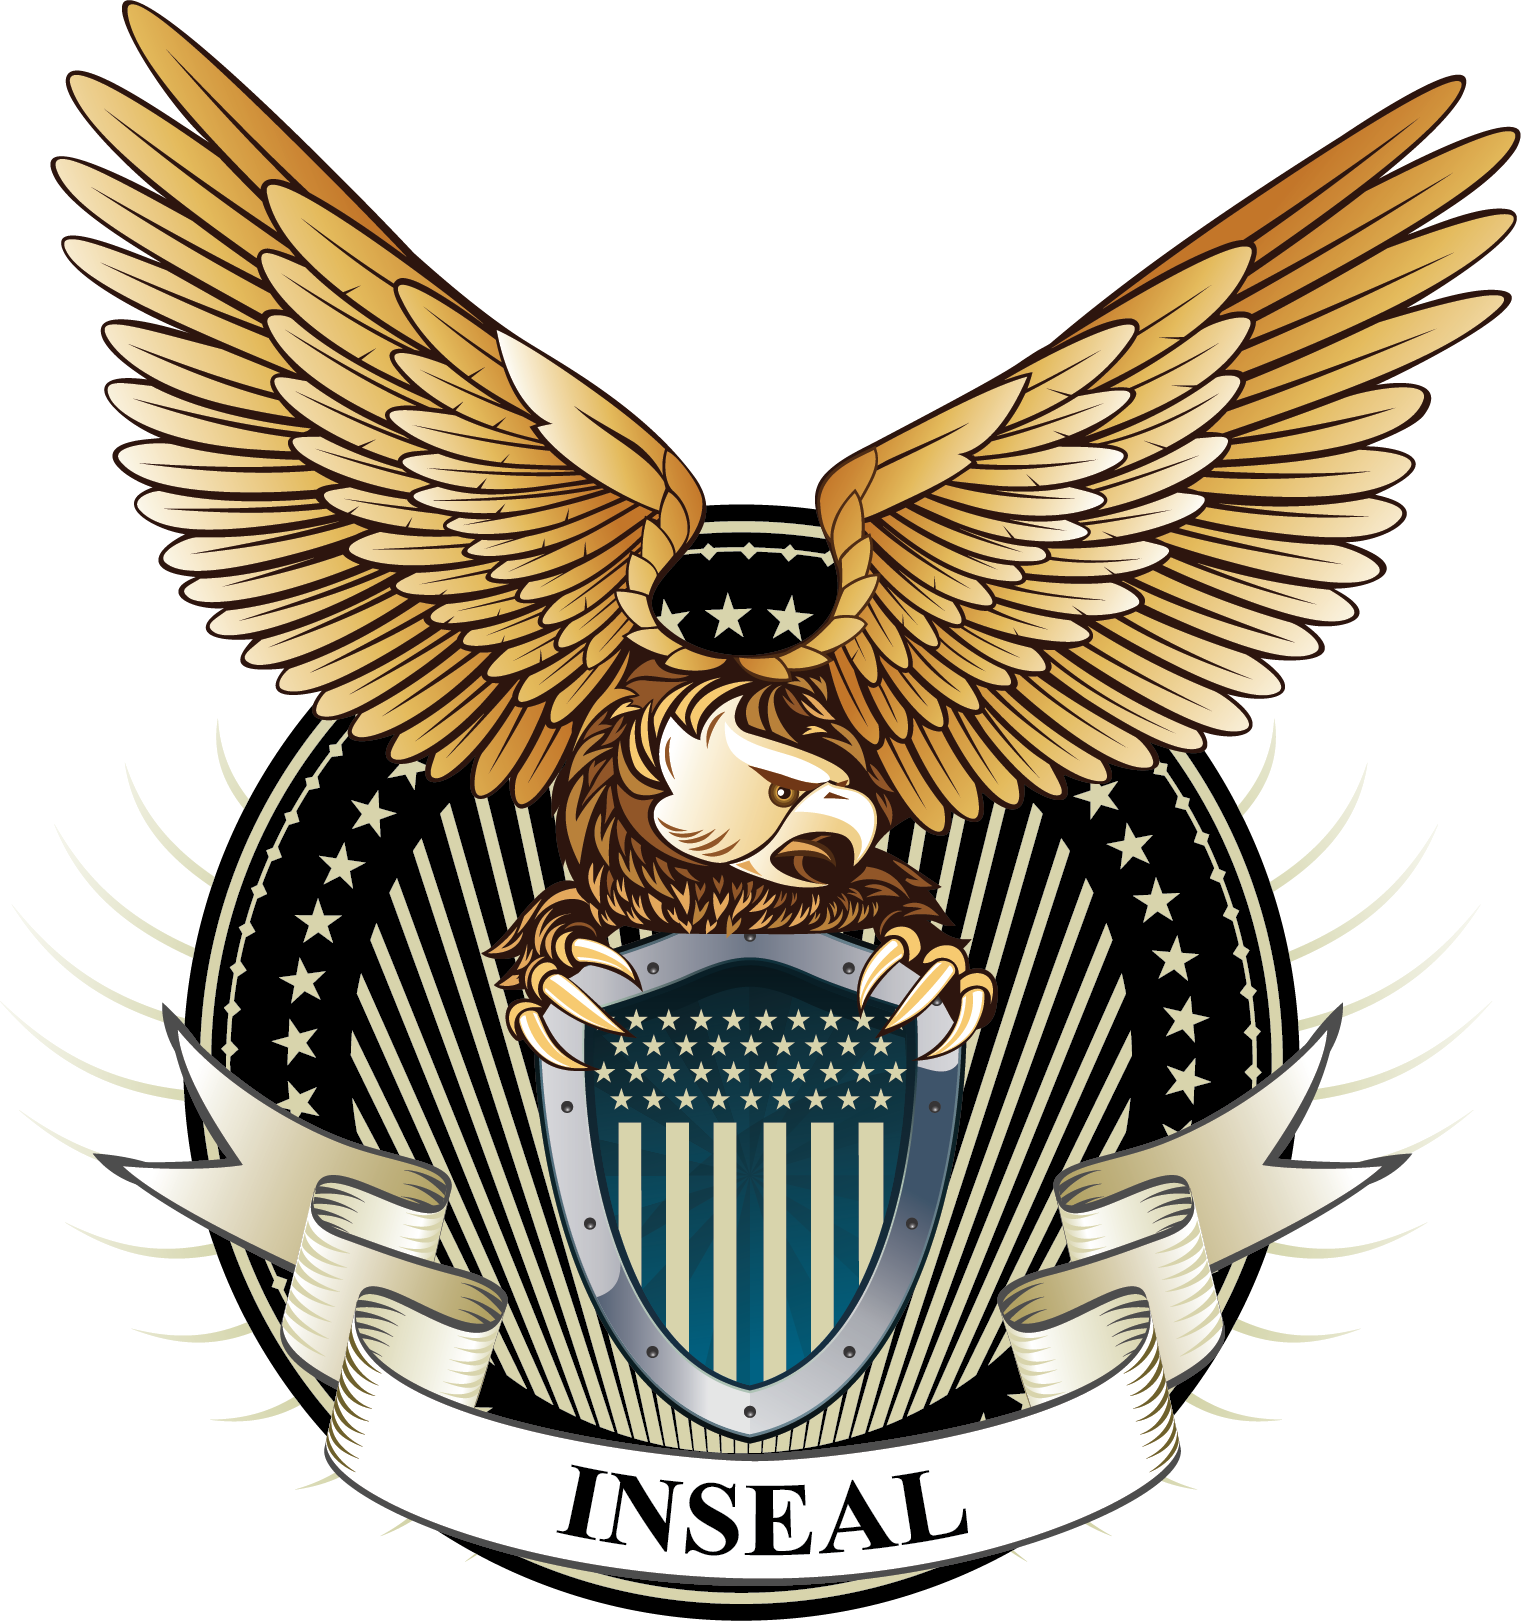 INSEAL